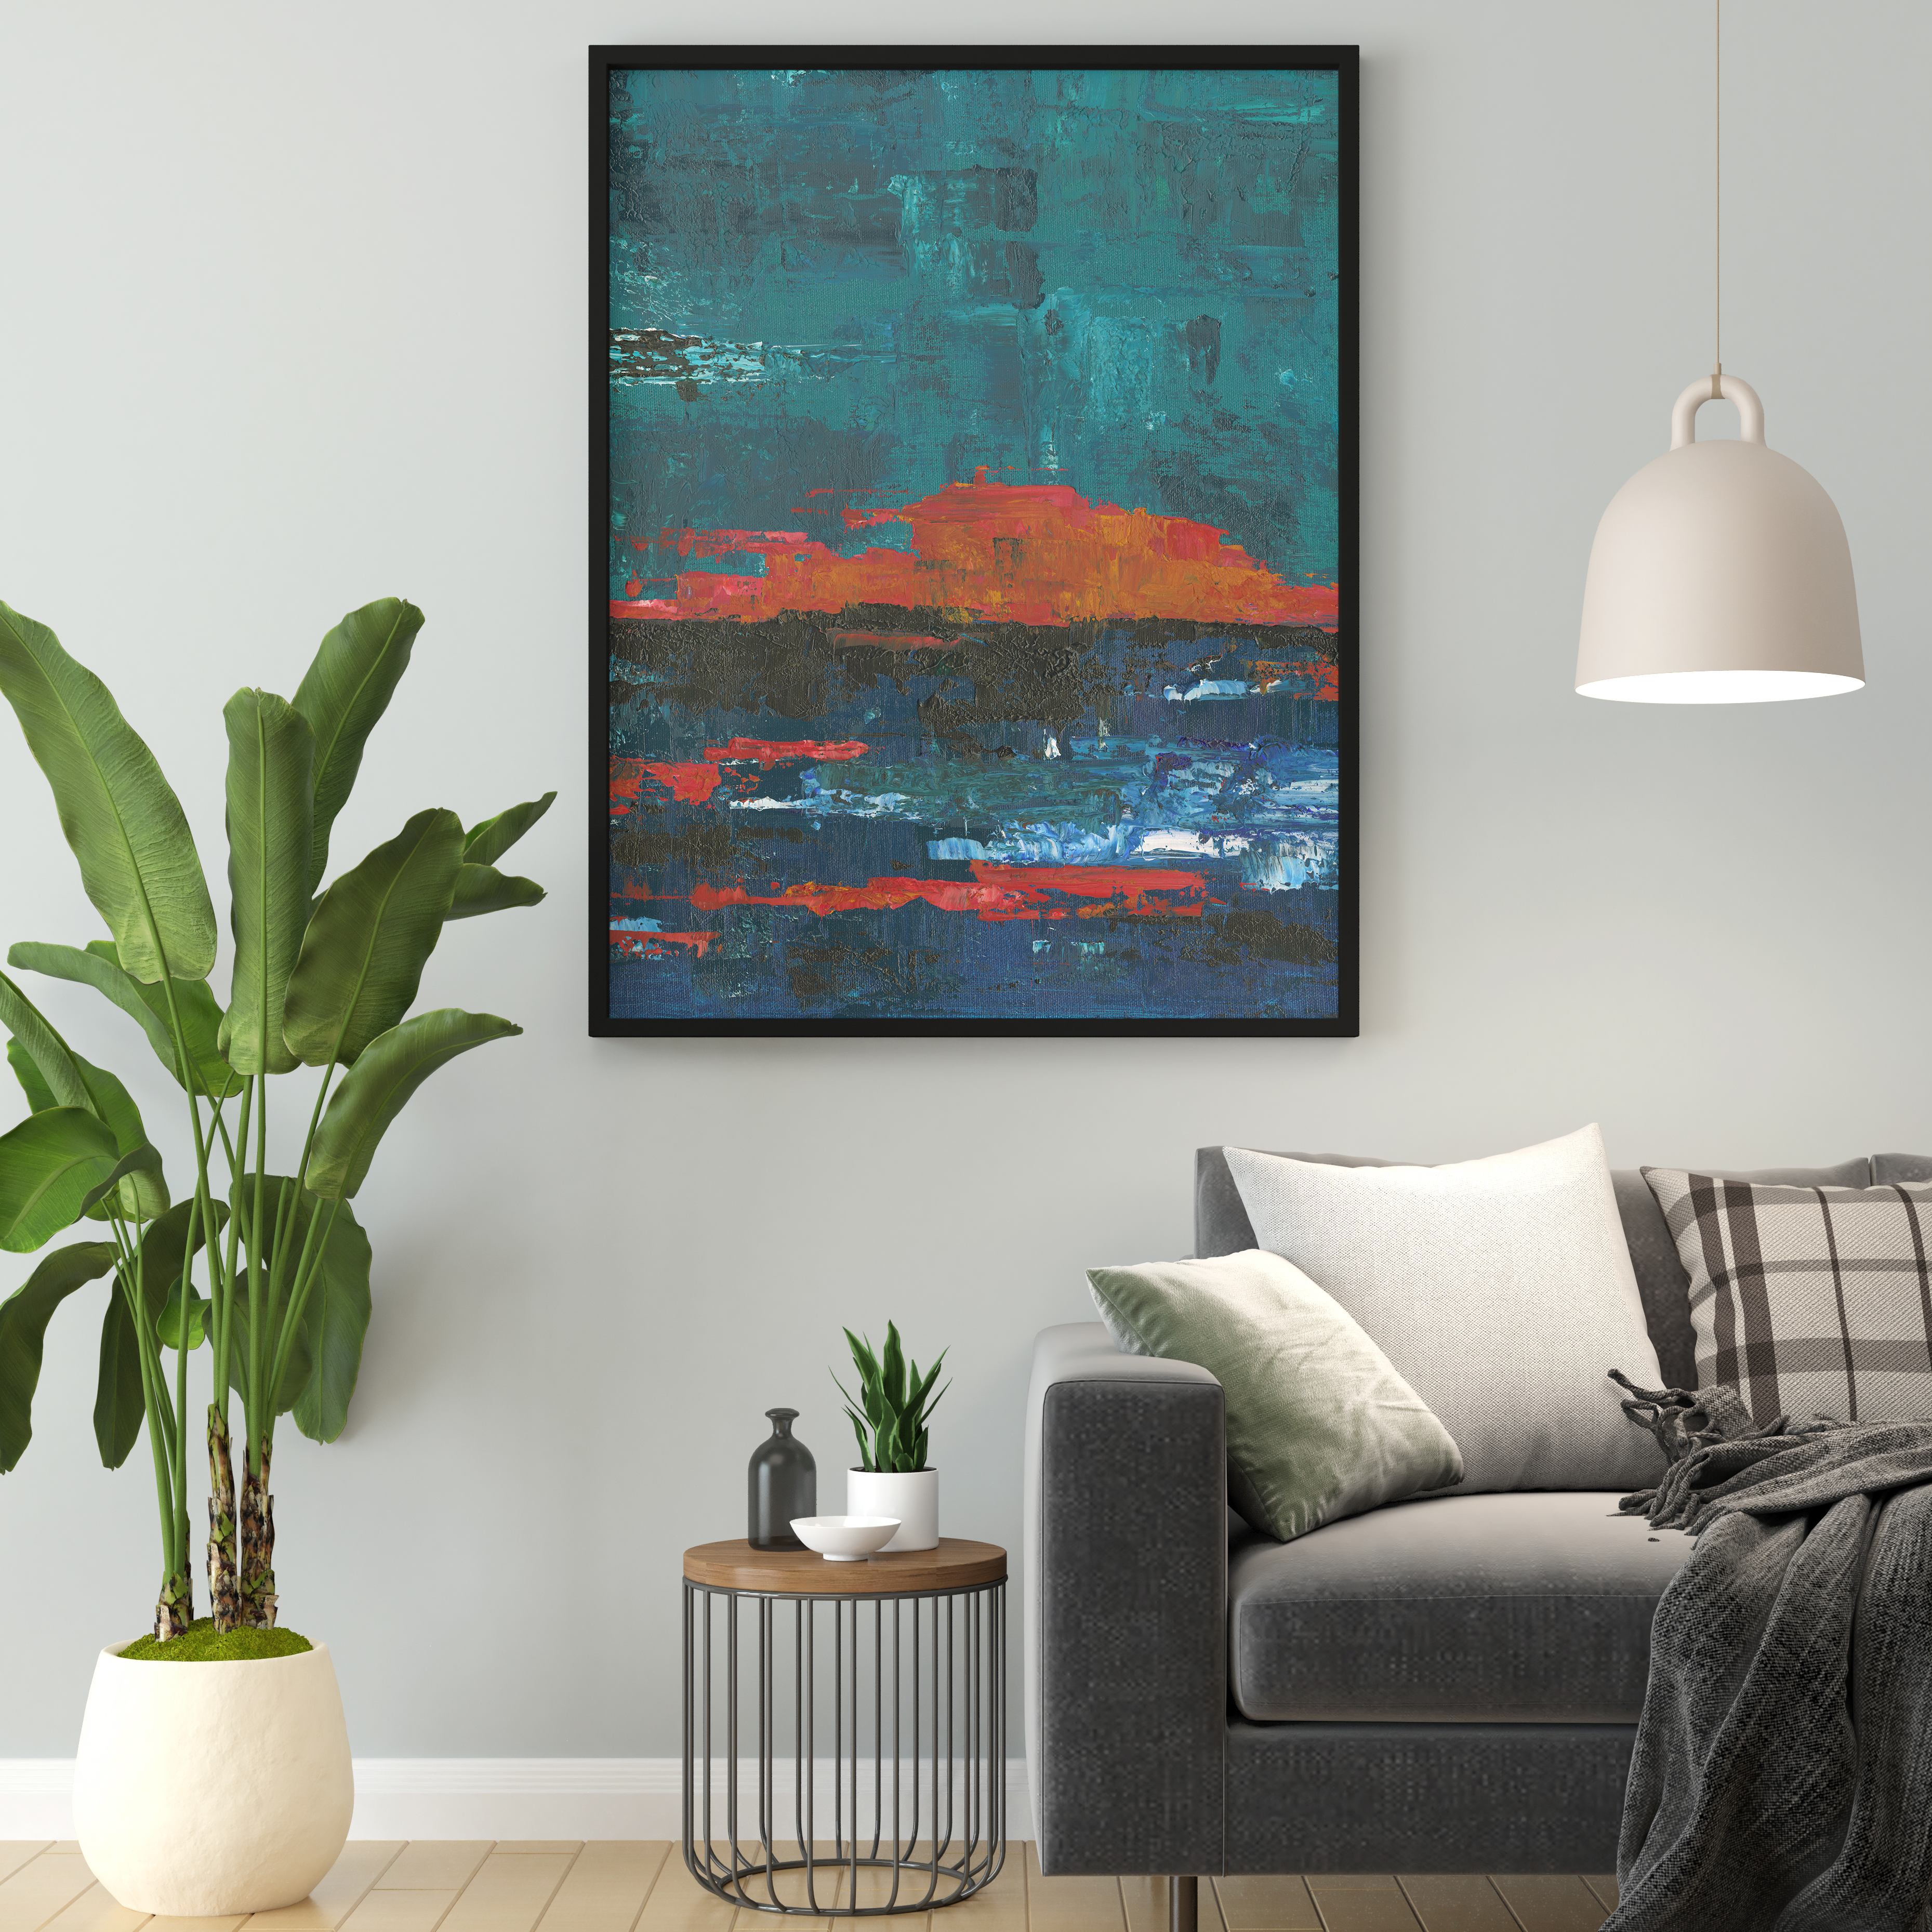 Blue orange and dark blue abstract painting